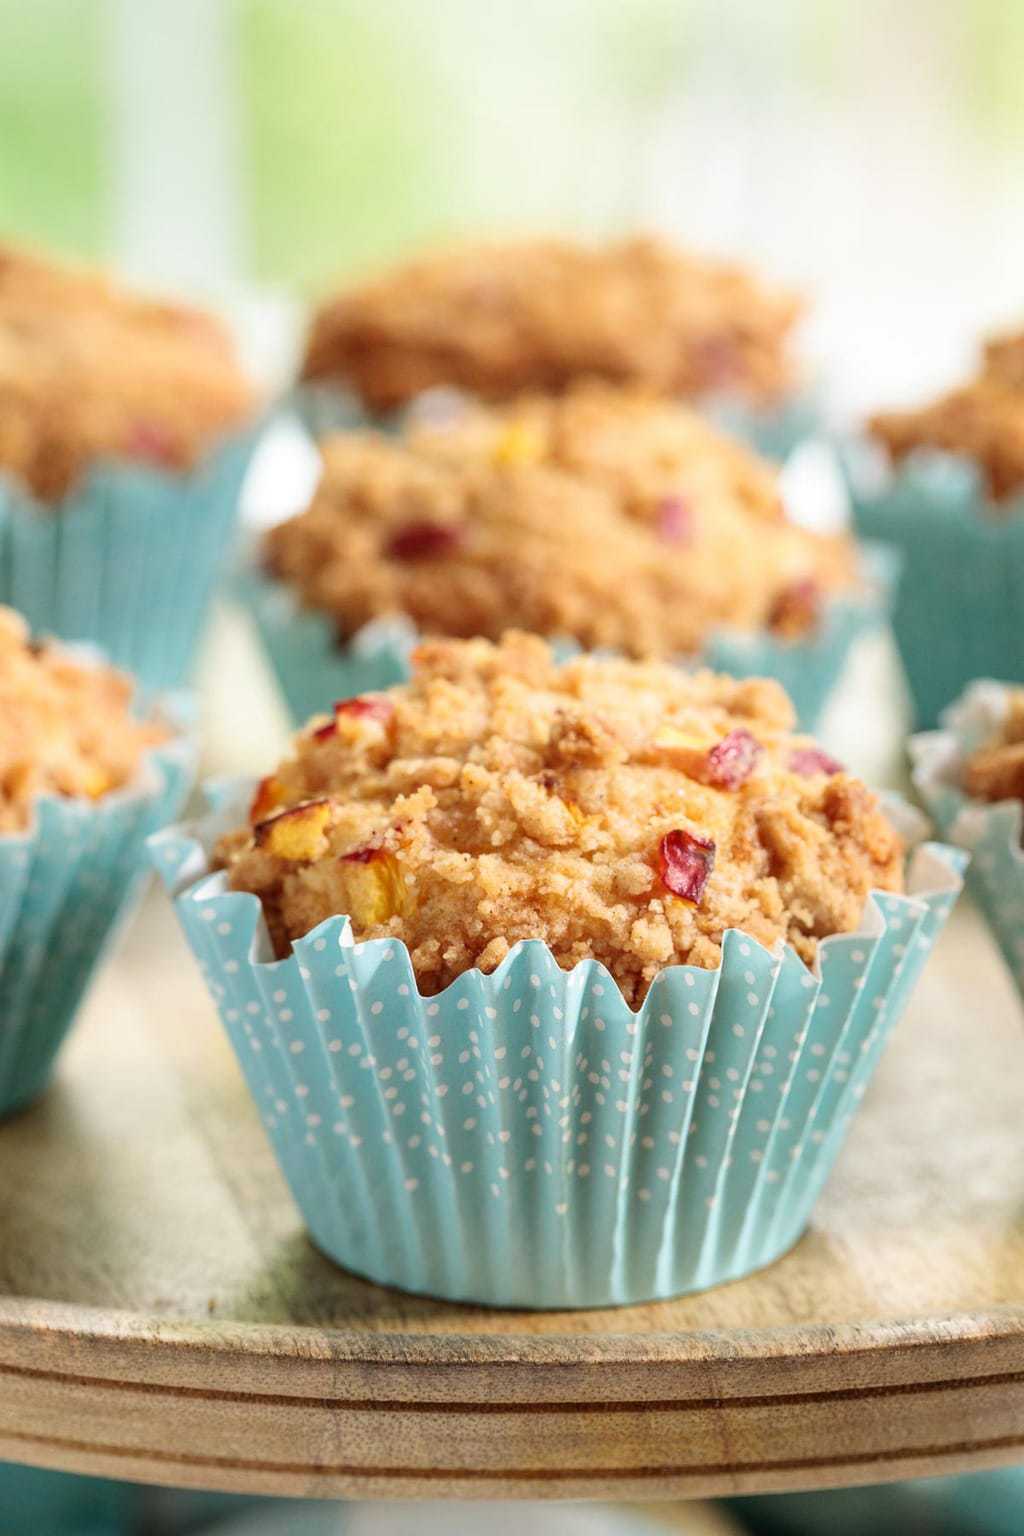 Vertical closeup photo of Peach (or nectarine) Crumble Muffins in turquoise muffin liners.